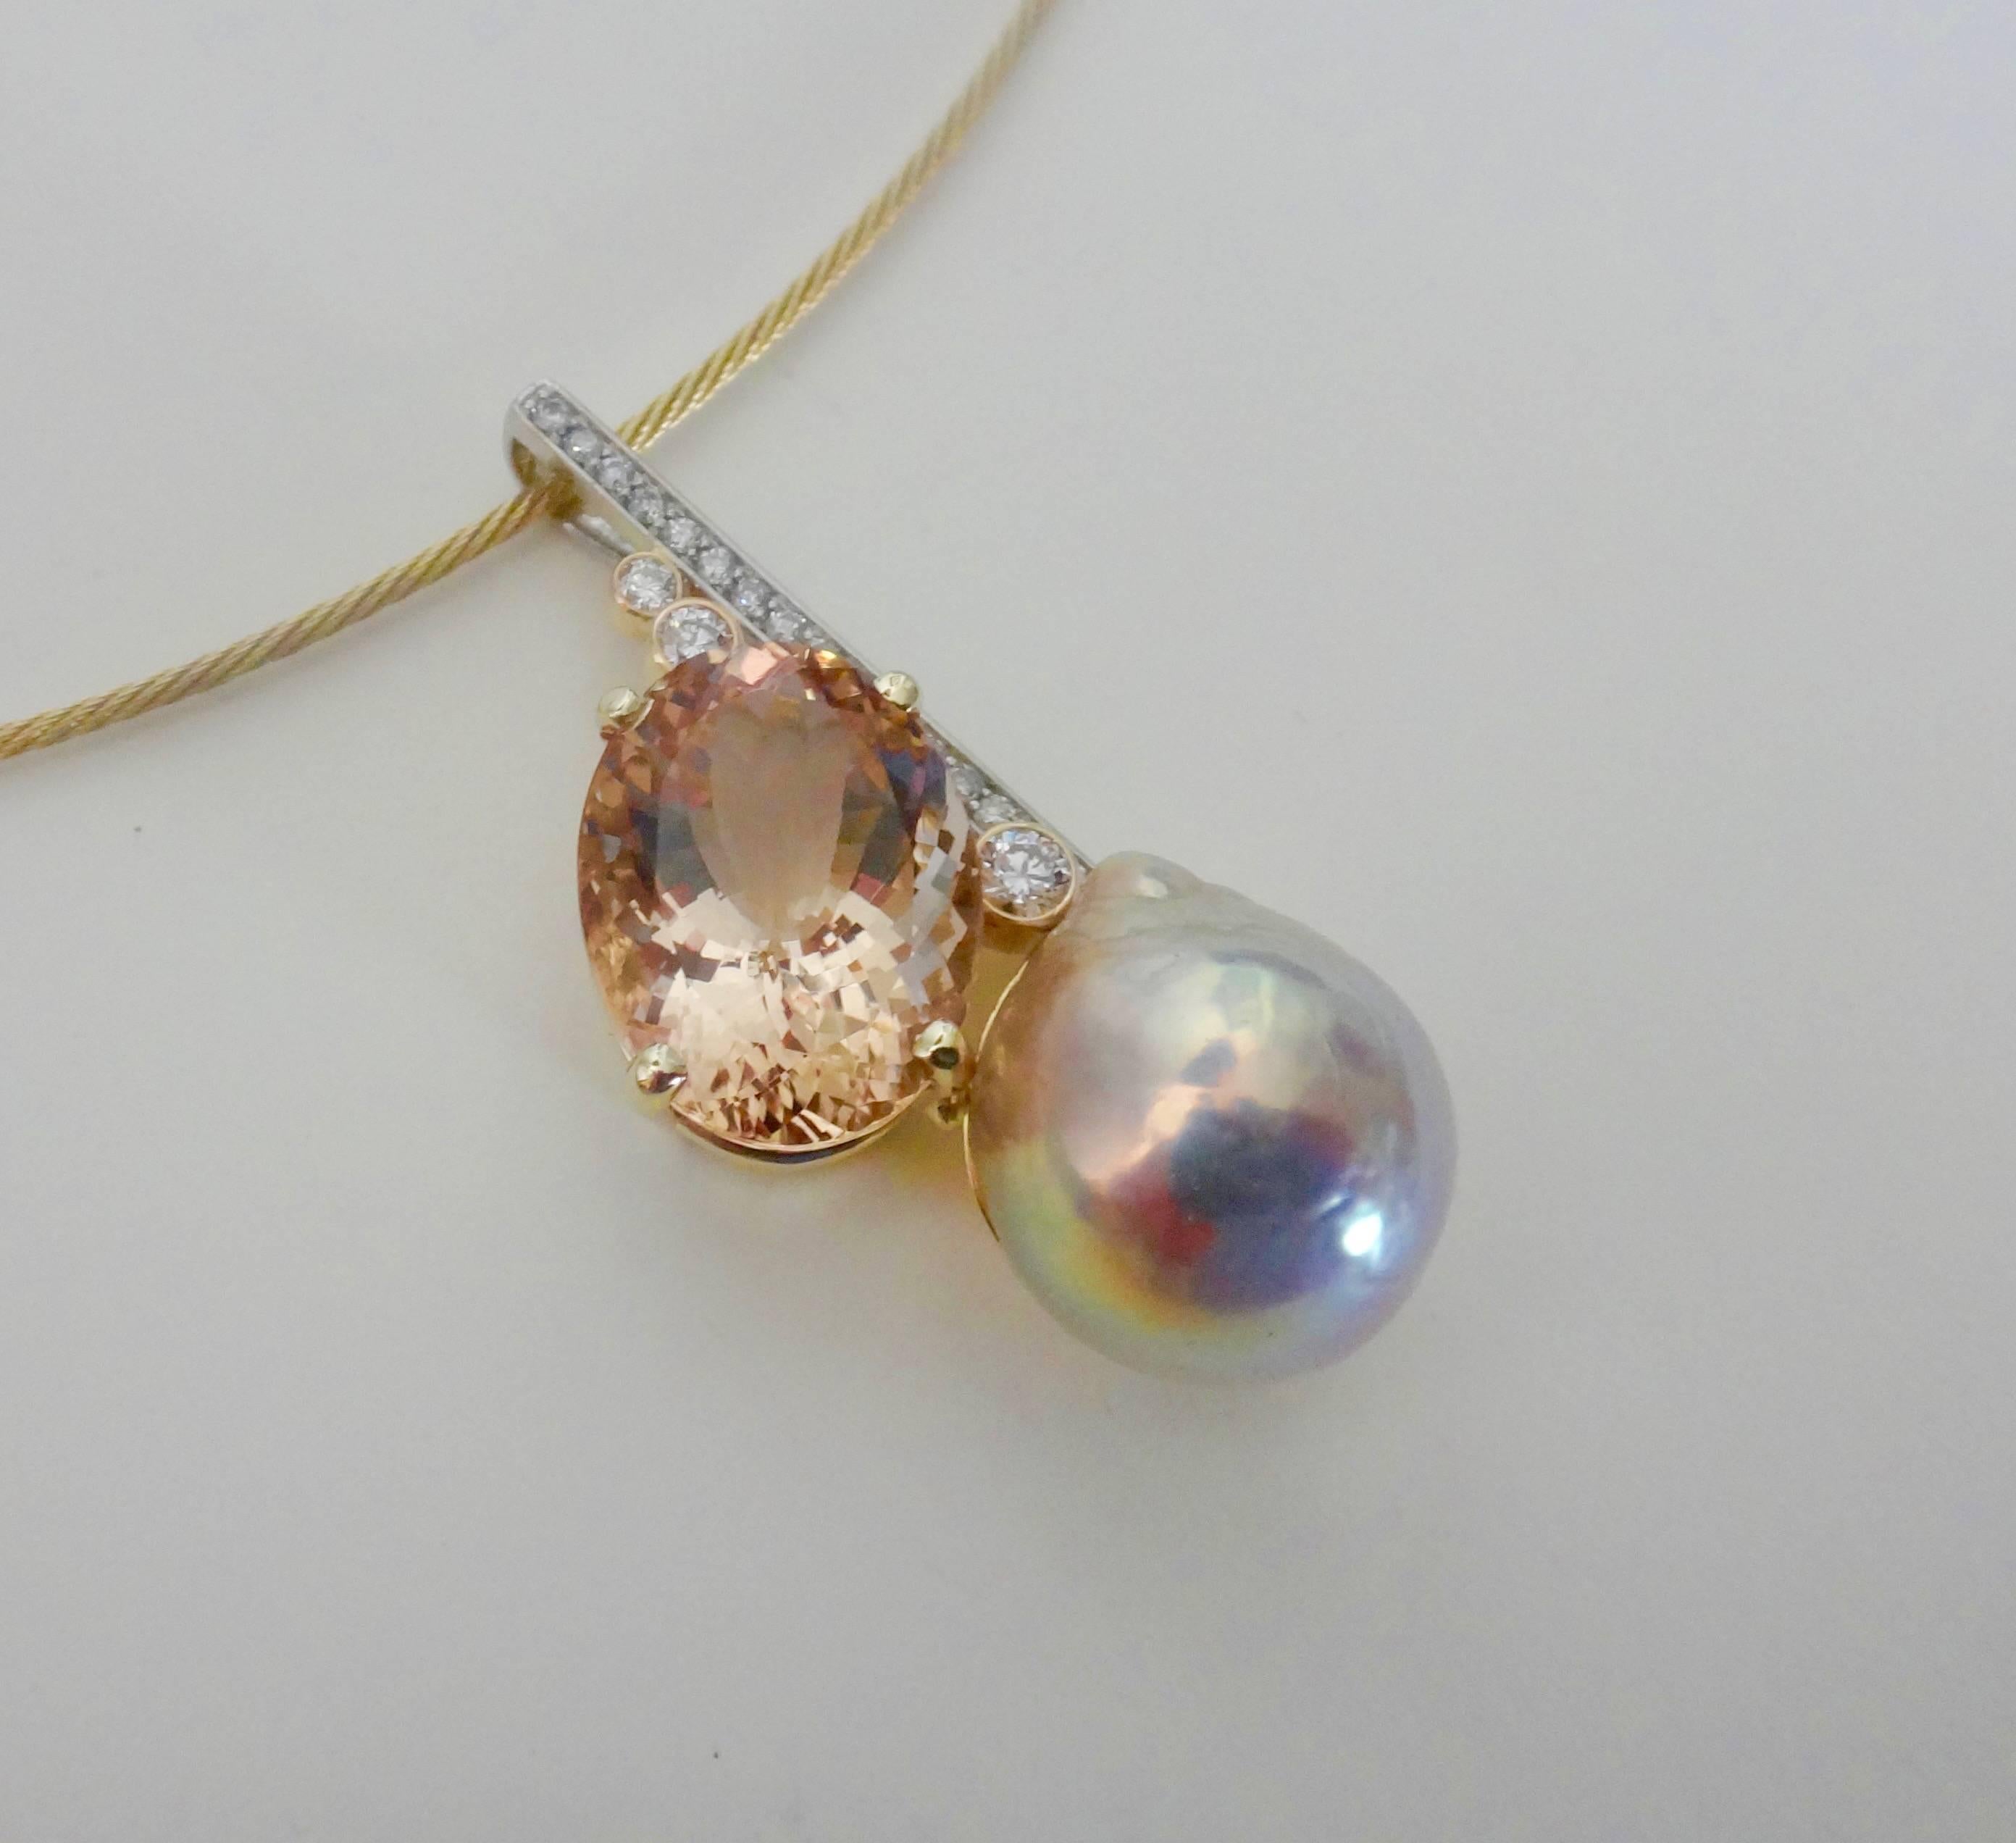 Morganite in a bright shell pink color is featured in this modernist pendant  (Morganite is a member of the Beryl family of gems including aquamarine, golden beryl and heliodor) The oval Portuguese faceting configuration contributes to the